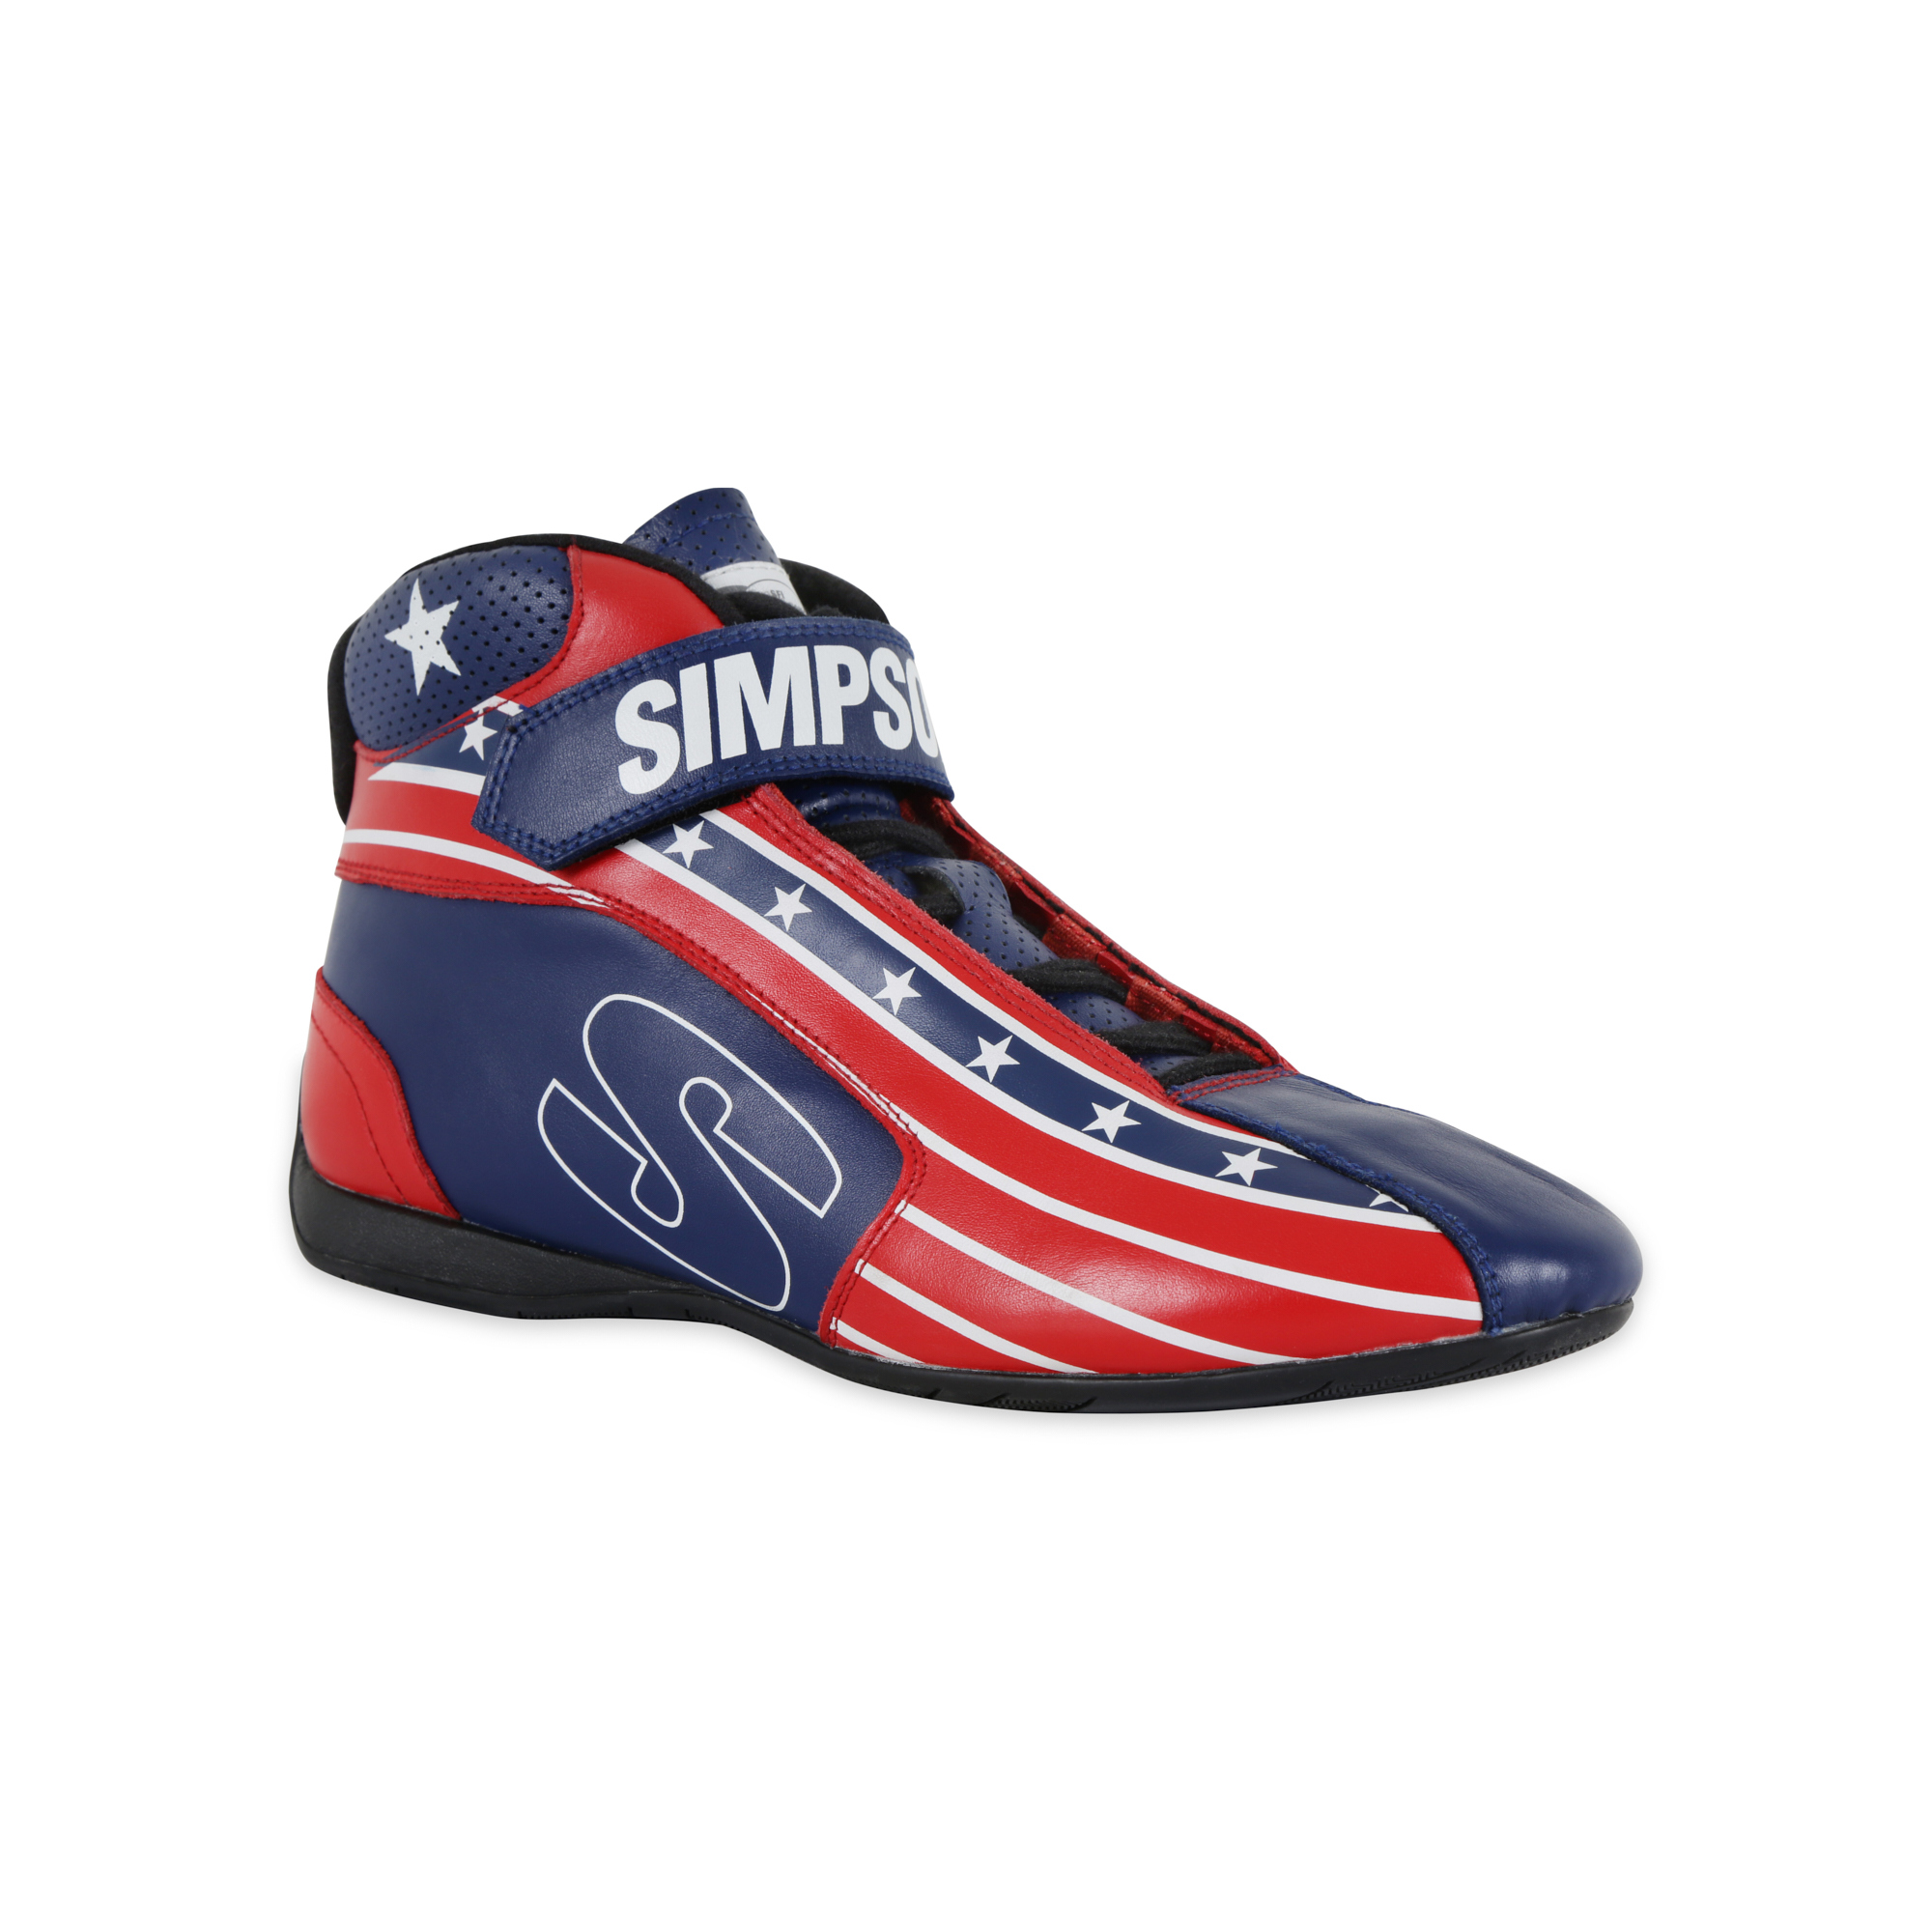 Simpson Safety DX2115P Shoe, DNA X2 Patriot, Mid-Top, SFI 3.3/5, Leather Outer, Nomex Inner, Red / White / Blue, Size 11.5, Pair